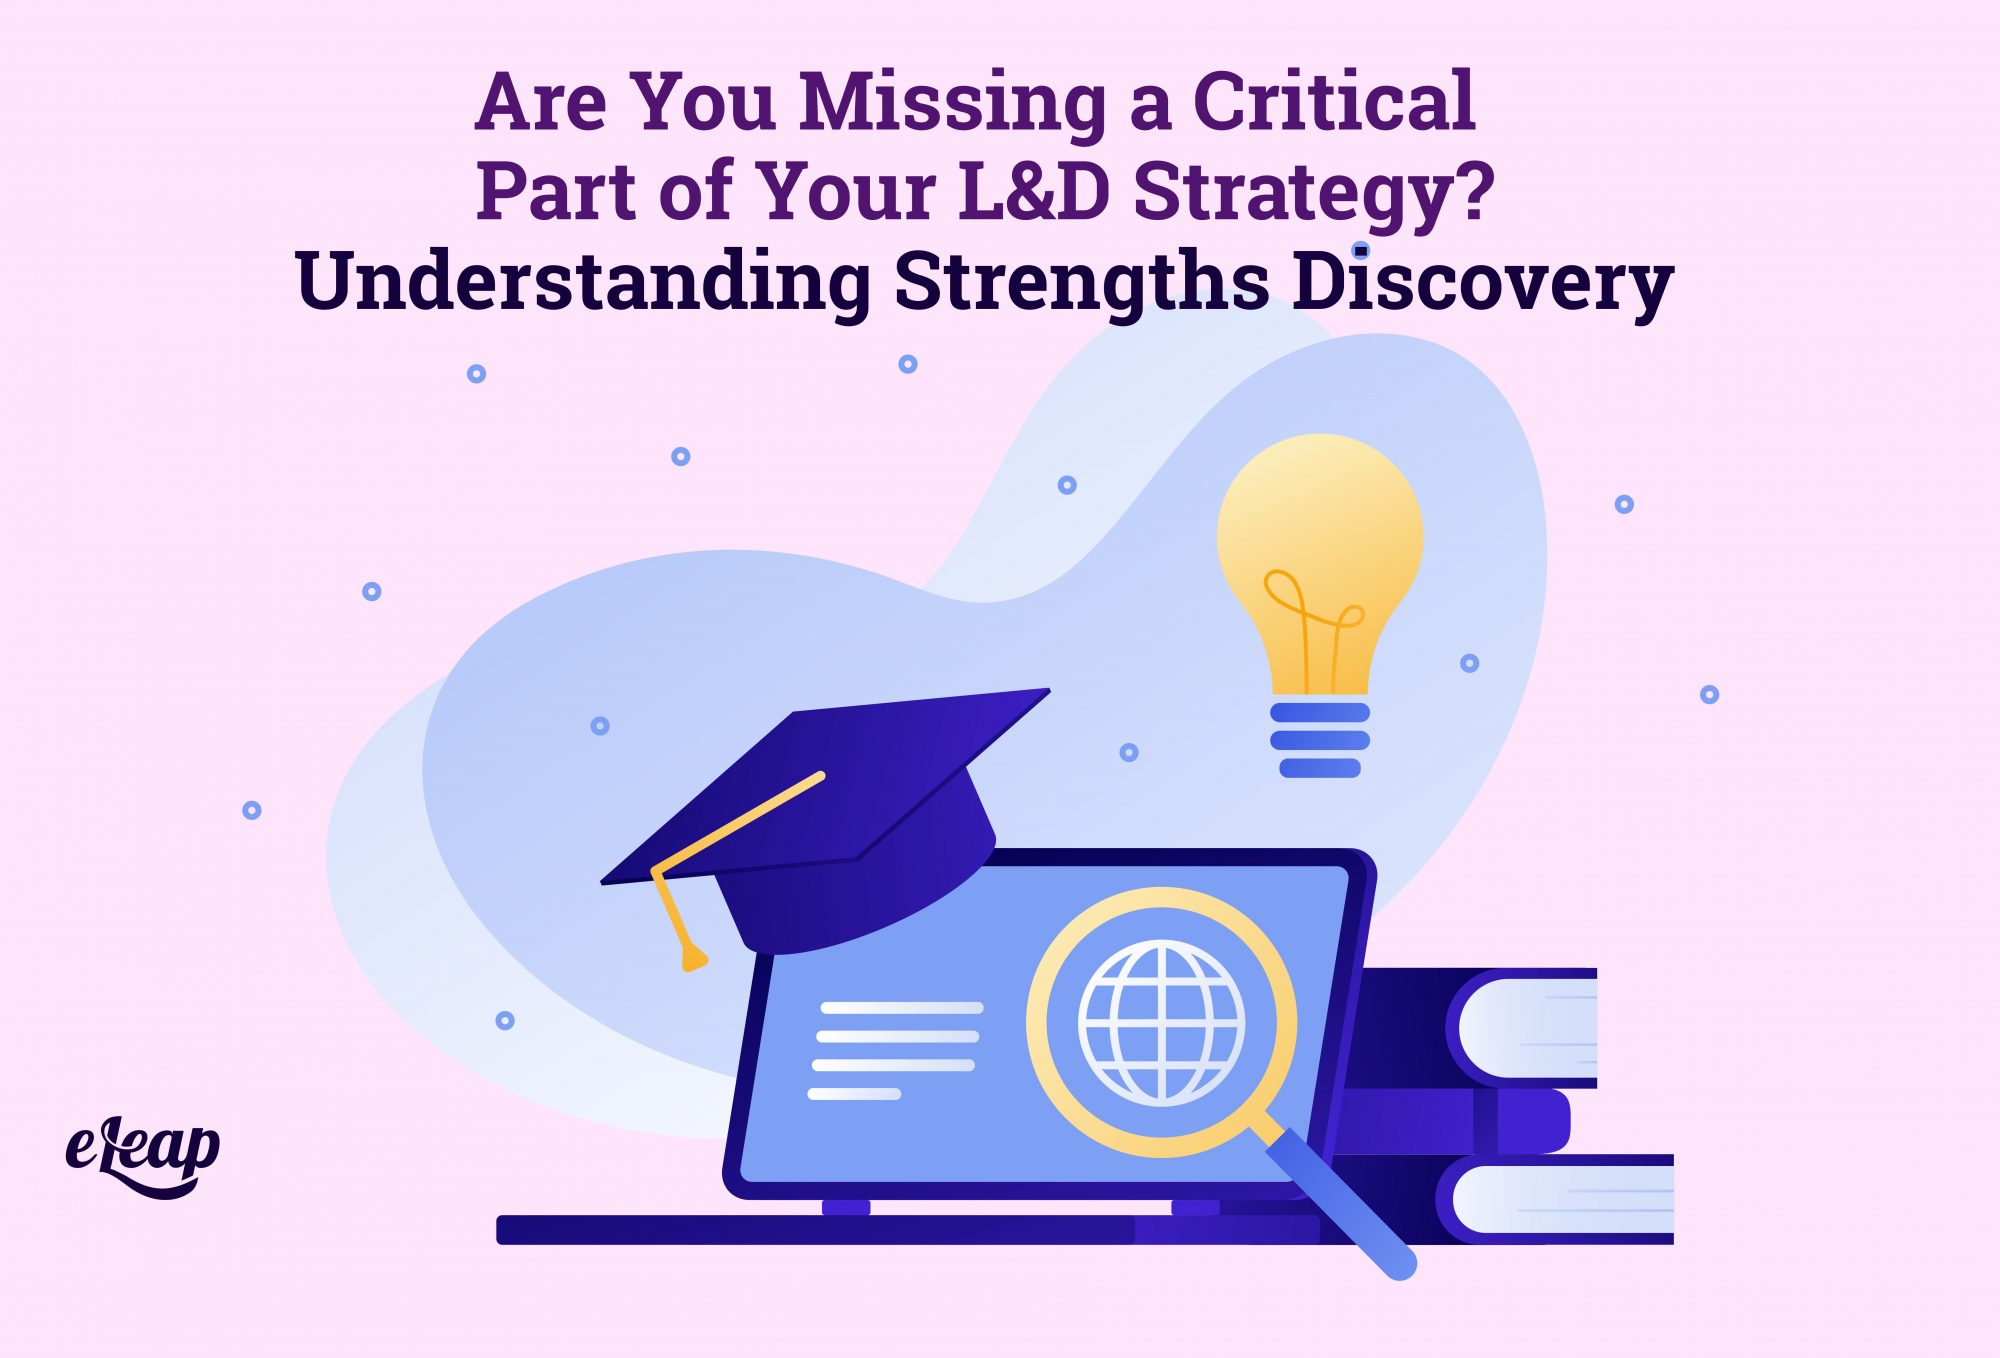 Are You Missing a Critical Part of Your L&D Strategy? Understanding Strengths Discovery